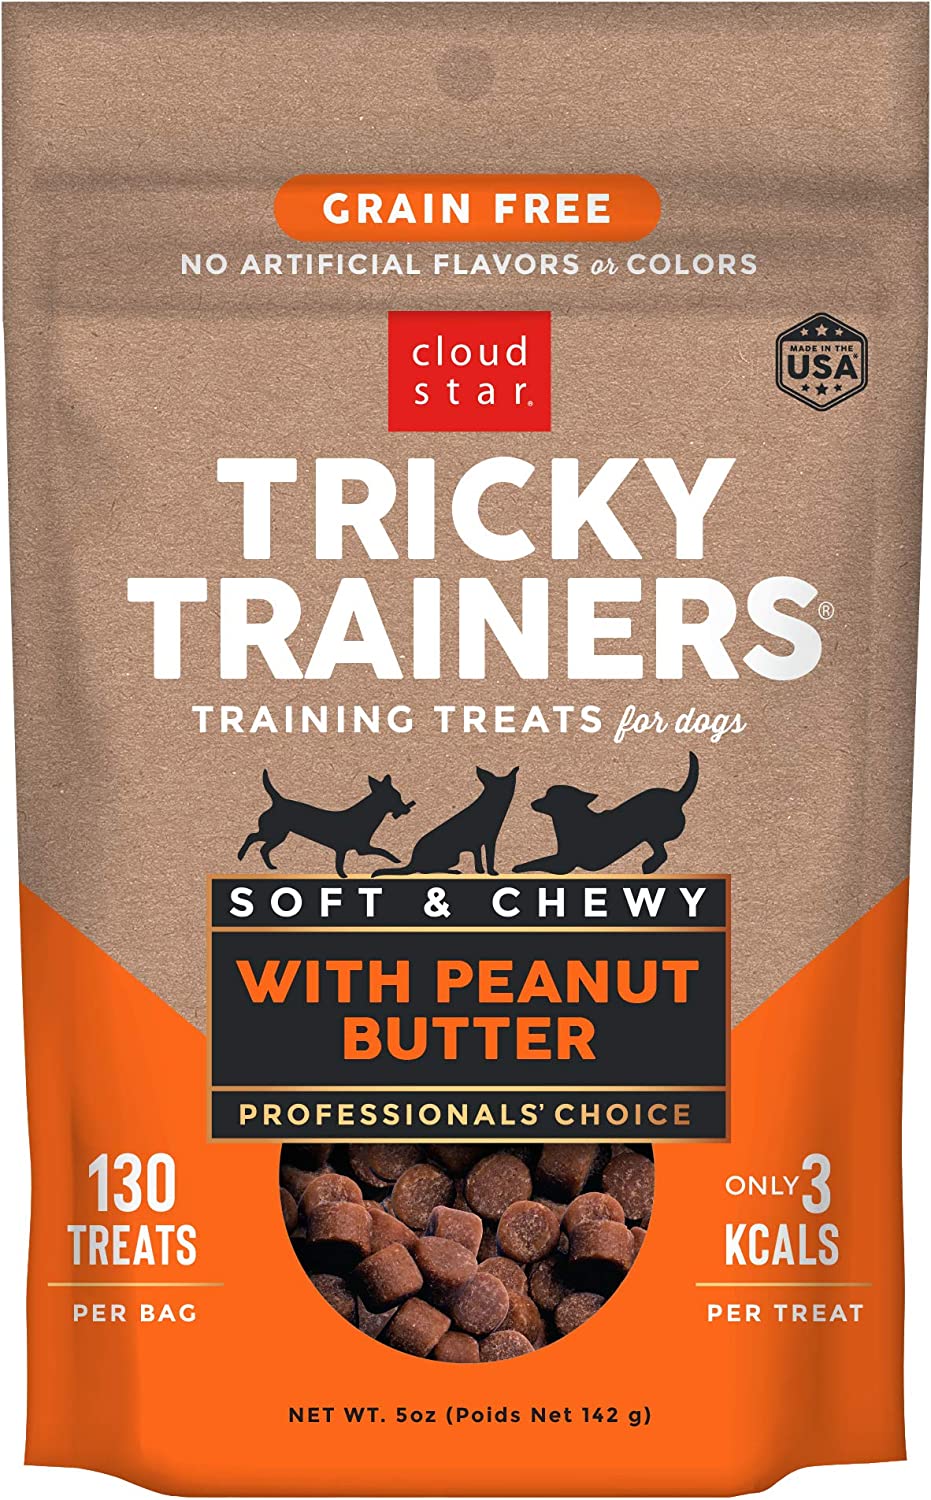 Cloud Star Tricky Trainers Chewy Peanut Butter & Grain Free, Low Calorie Dog Training Treats, Baked in the USA (5 oz)